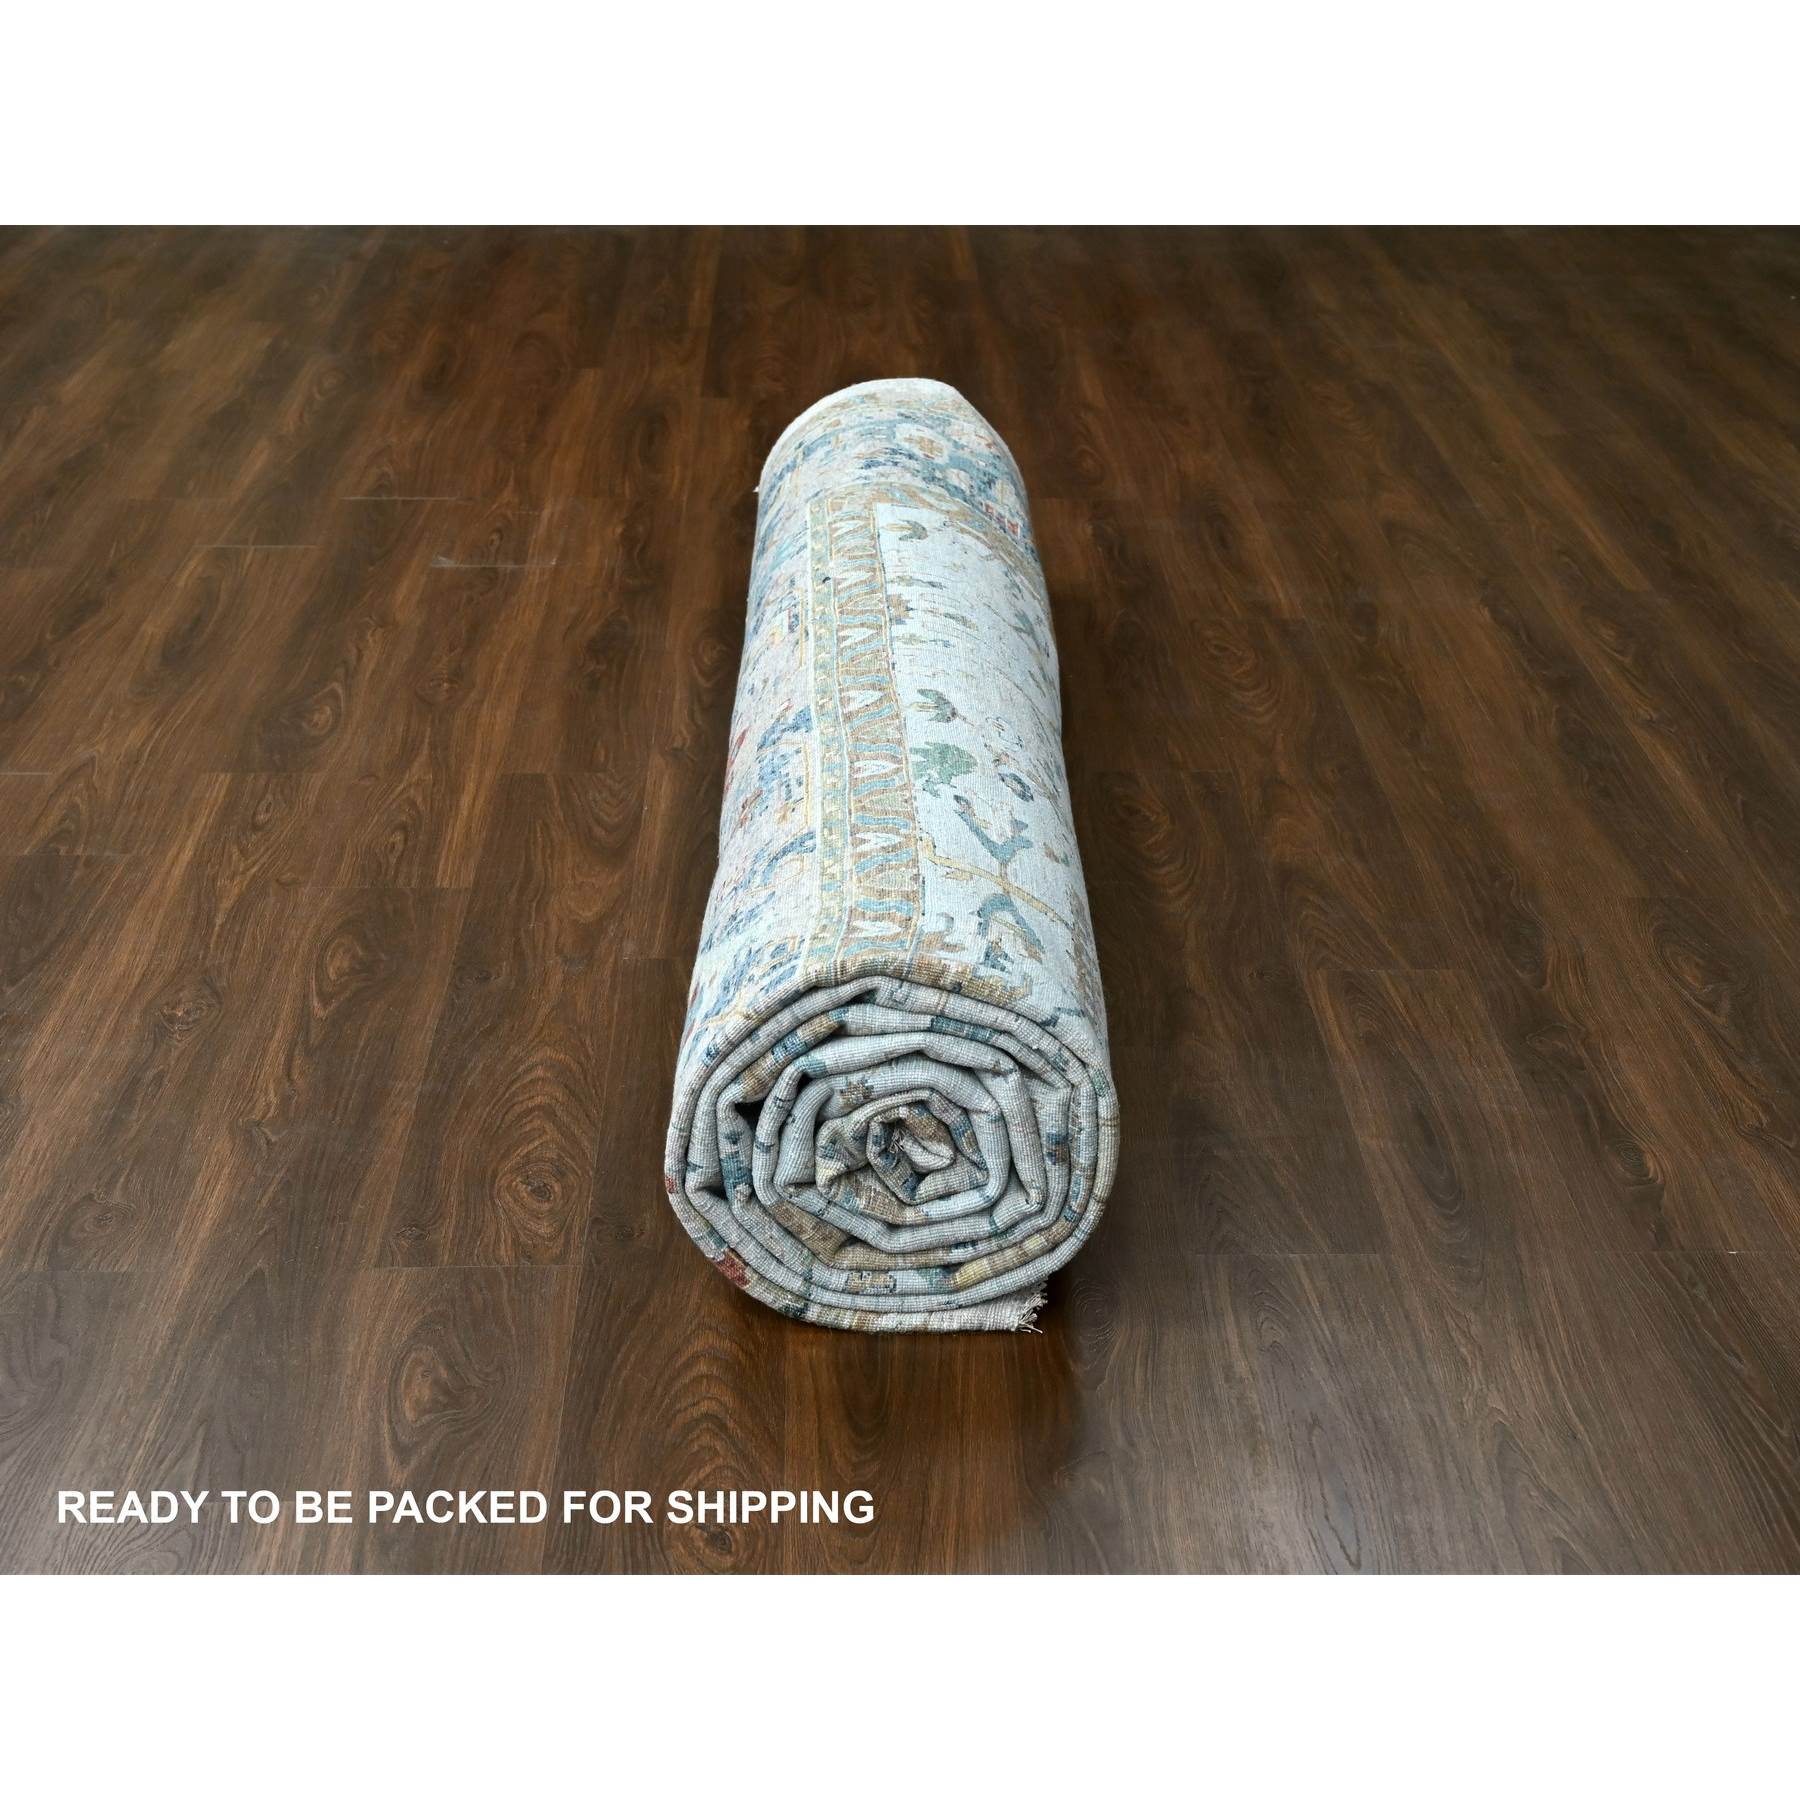 Transitional-Hand-Knotted-Rug-424135